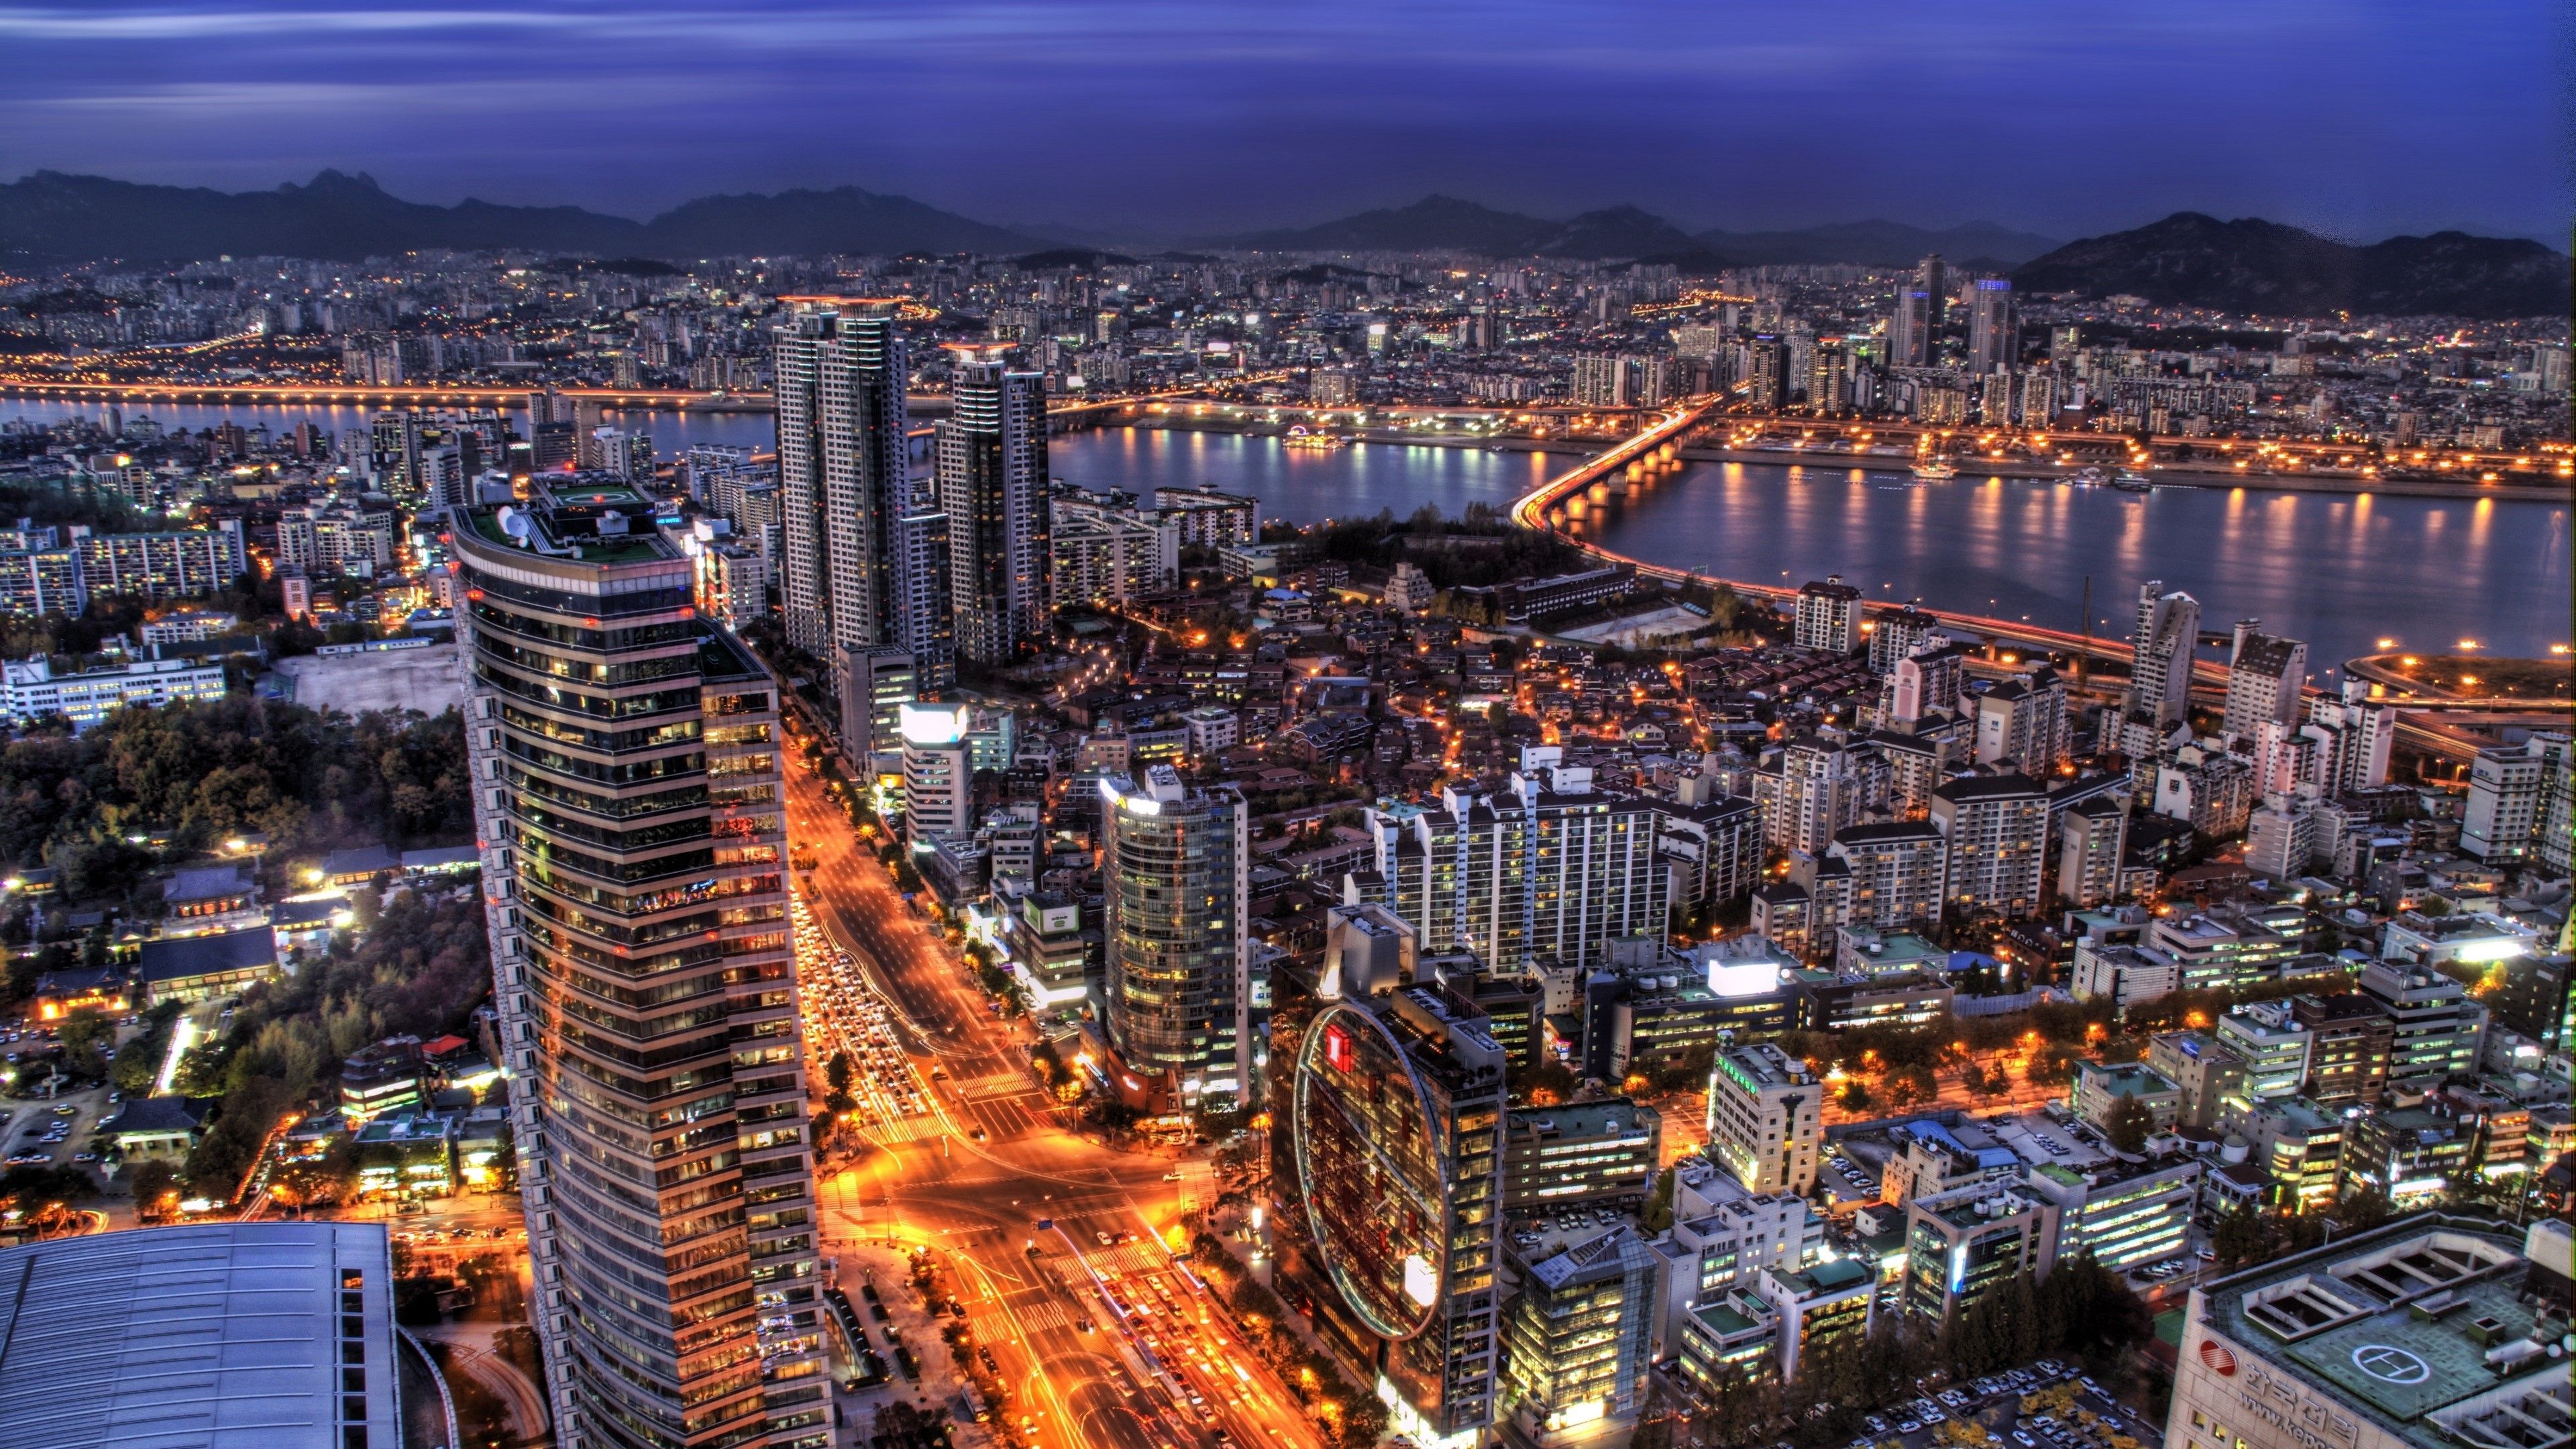 A cityscape at night with a river running through it - Seoul